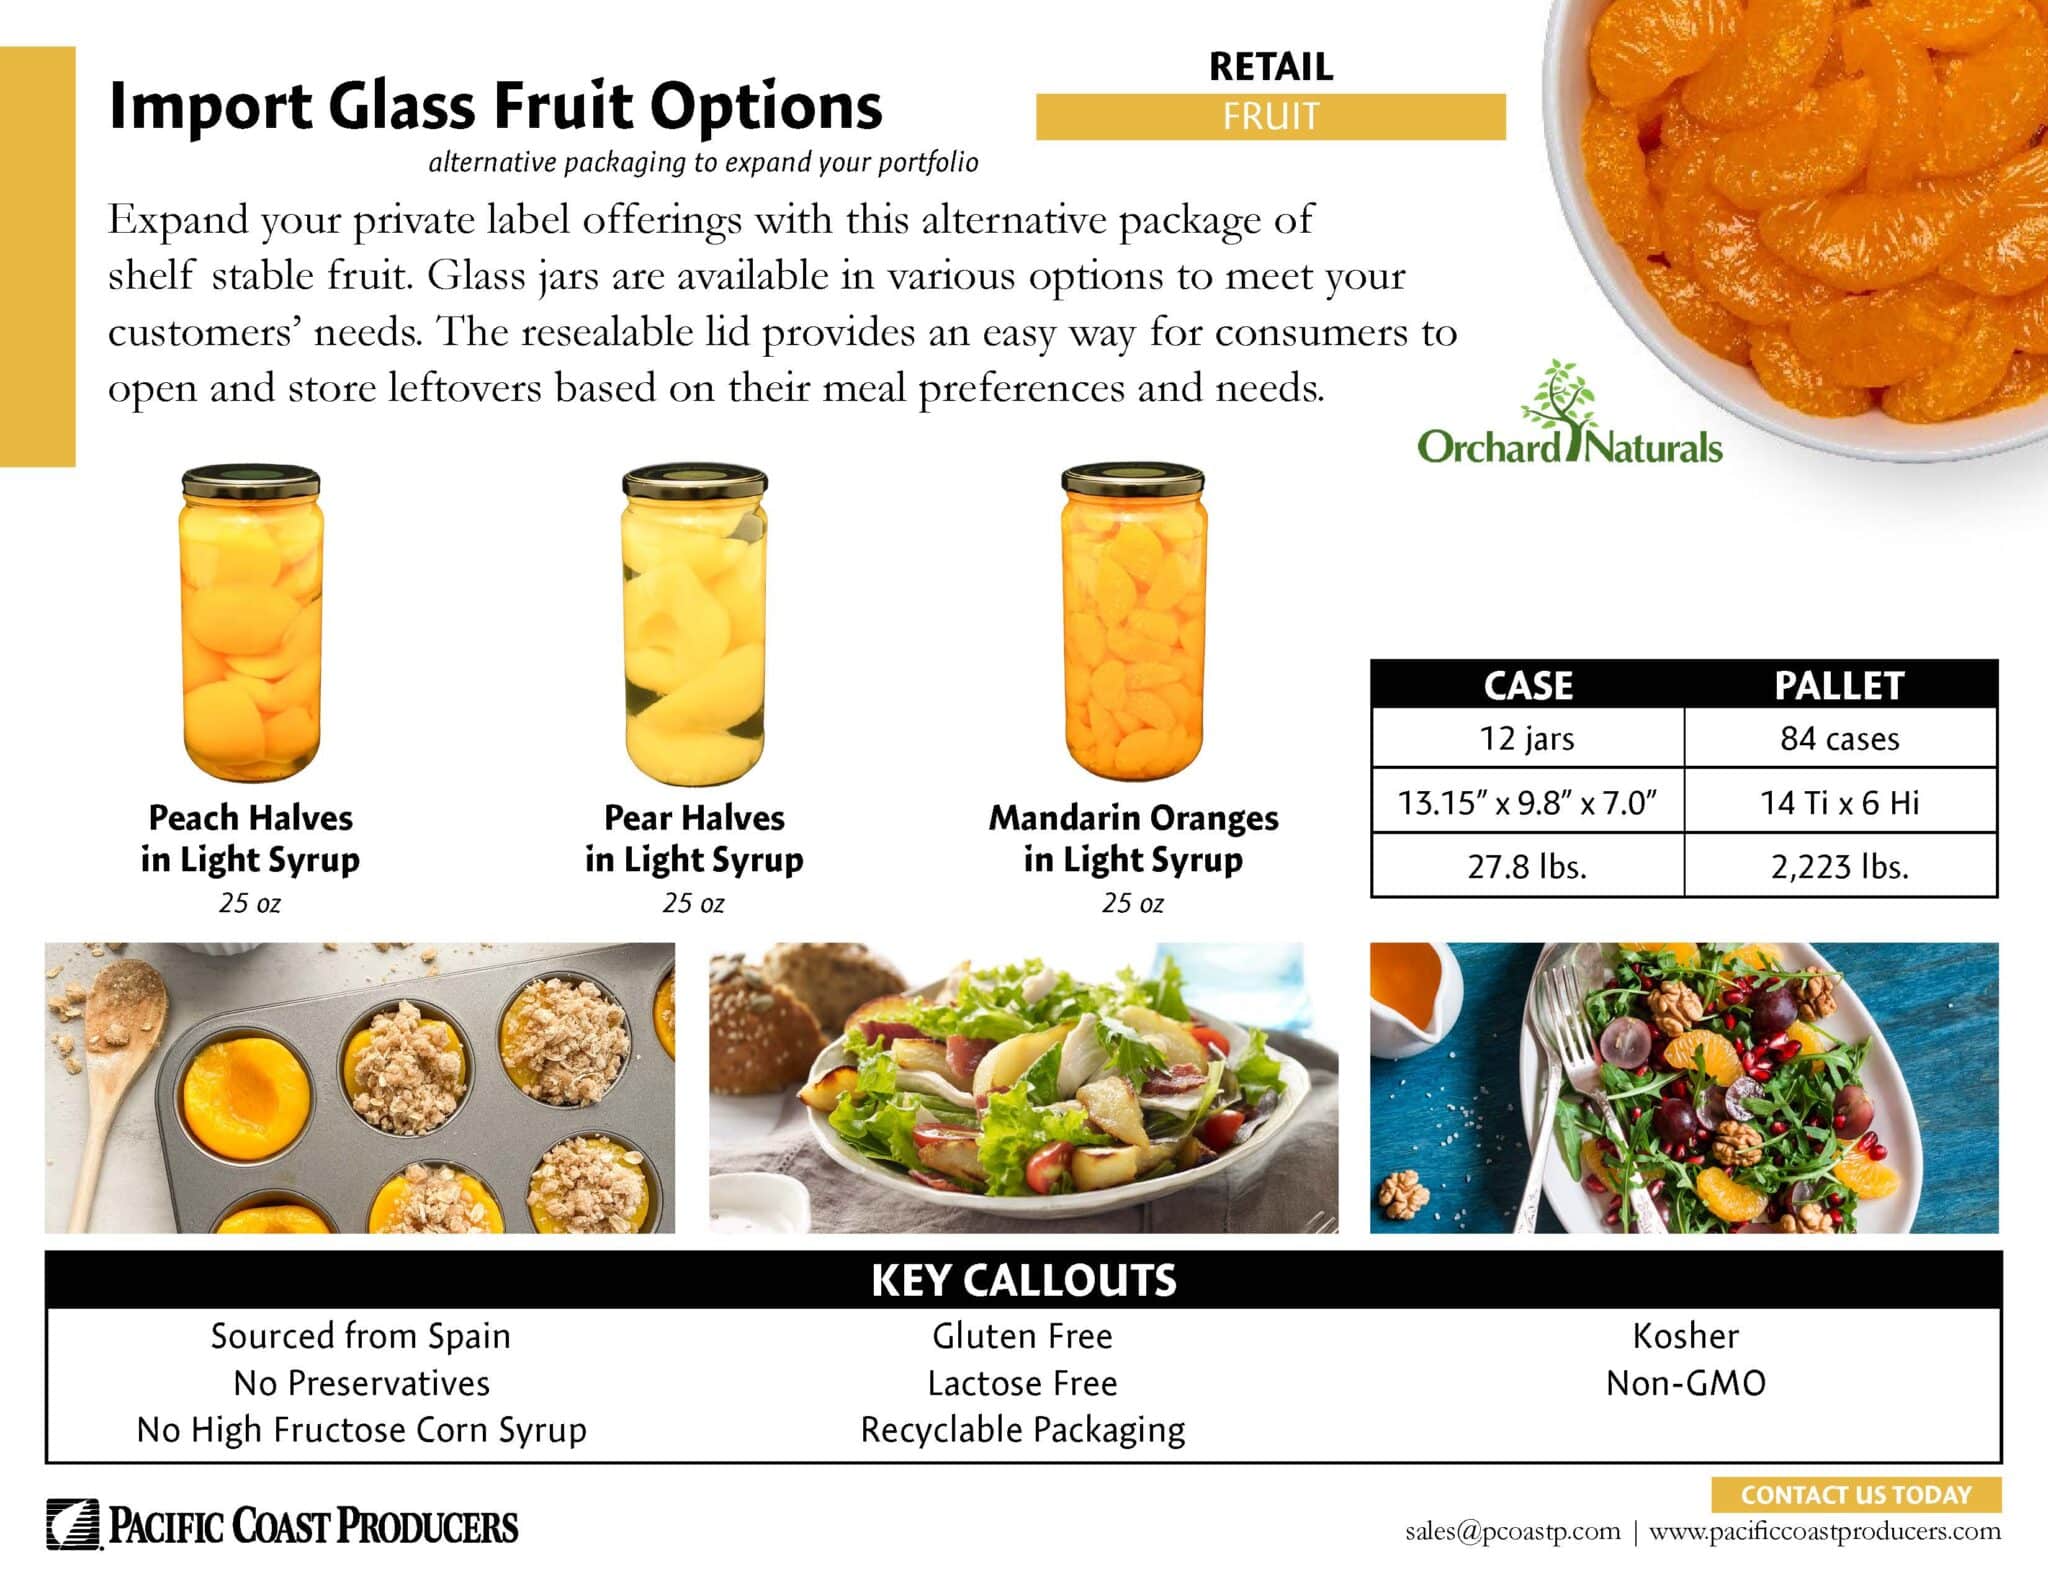 pacific coast producers product sale sheet for import glass fruit options for the retail market 25 ounce glass jar that contains either peach halves in light syrup, pear halves in light syrup, or mandarin oranges in light syrup